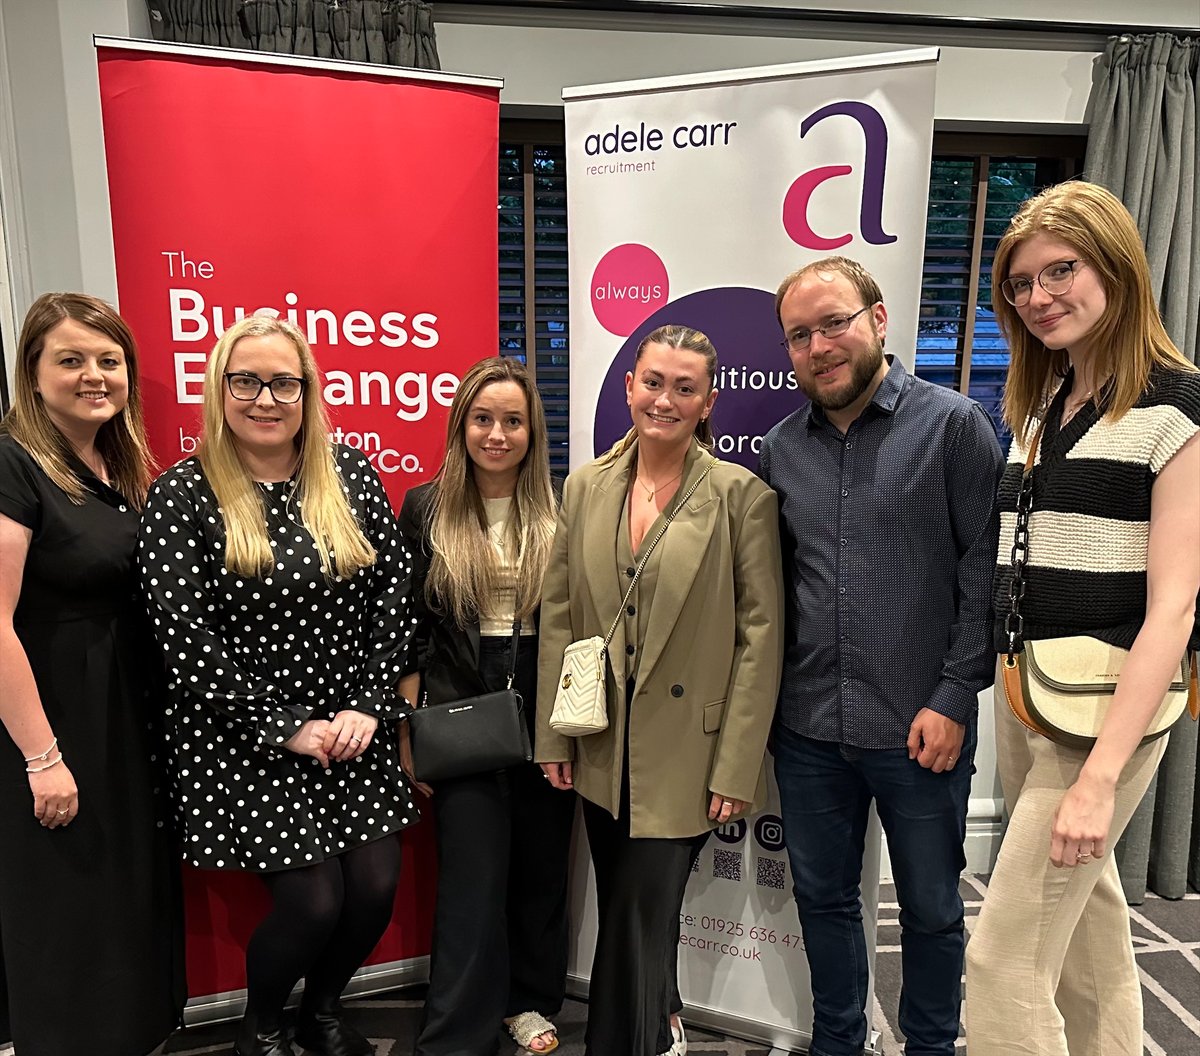 #TeamJS had a great time last night at the @AdeleCarr_  Annual Charity Quiz. 🎉 We're delighted that TeamJS came 3rd! 🥉Thank you @AdeleCarr_ for a fantastic night of quizzing, networking & fundraising for the amazing @HomeStart_Warr . 🙏

#charity #fundraising #quiz #networking